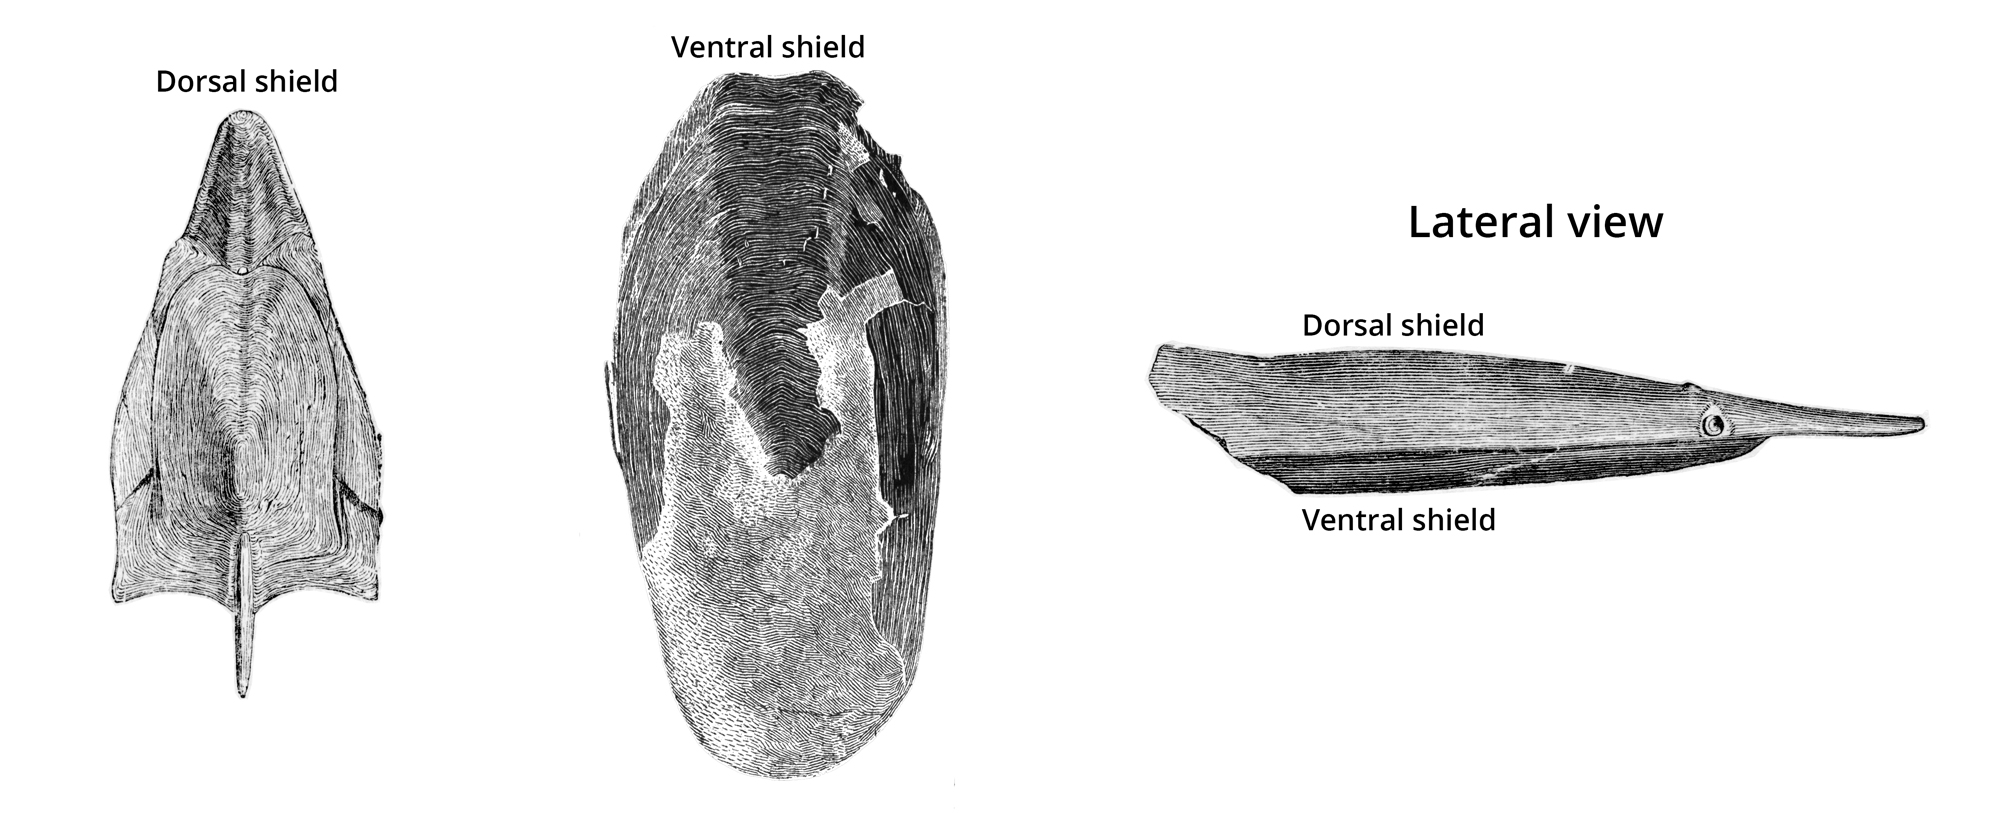 Image showing the dorsal and ventral headshields of Pteraspidomorphs.